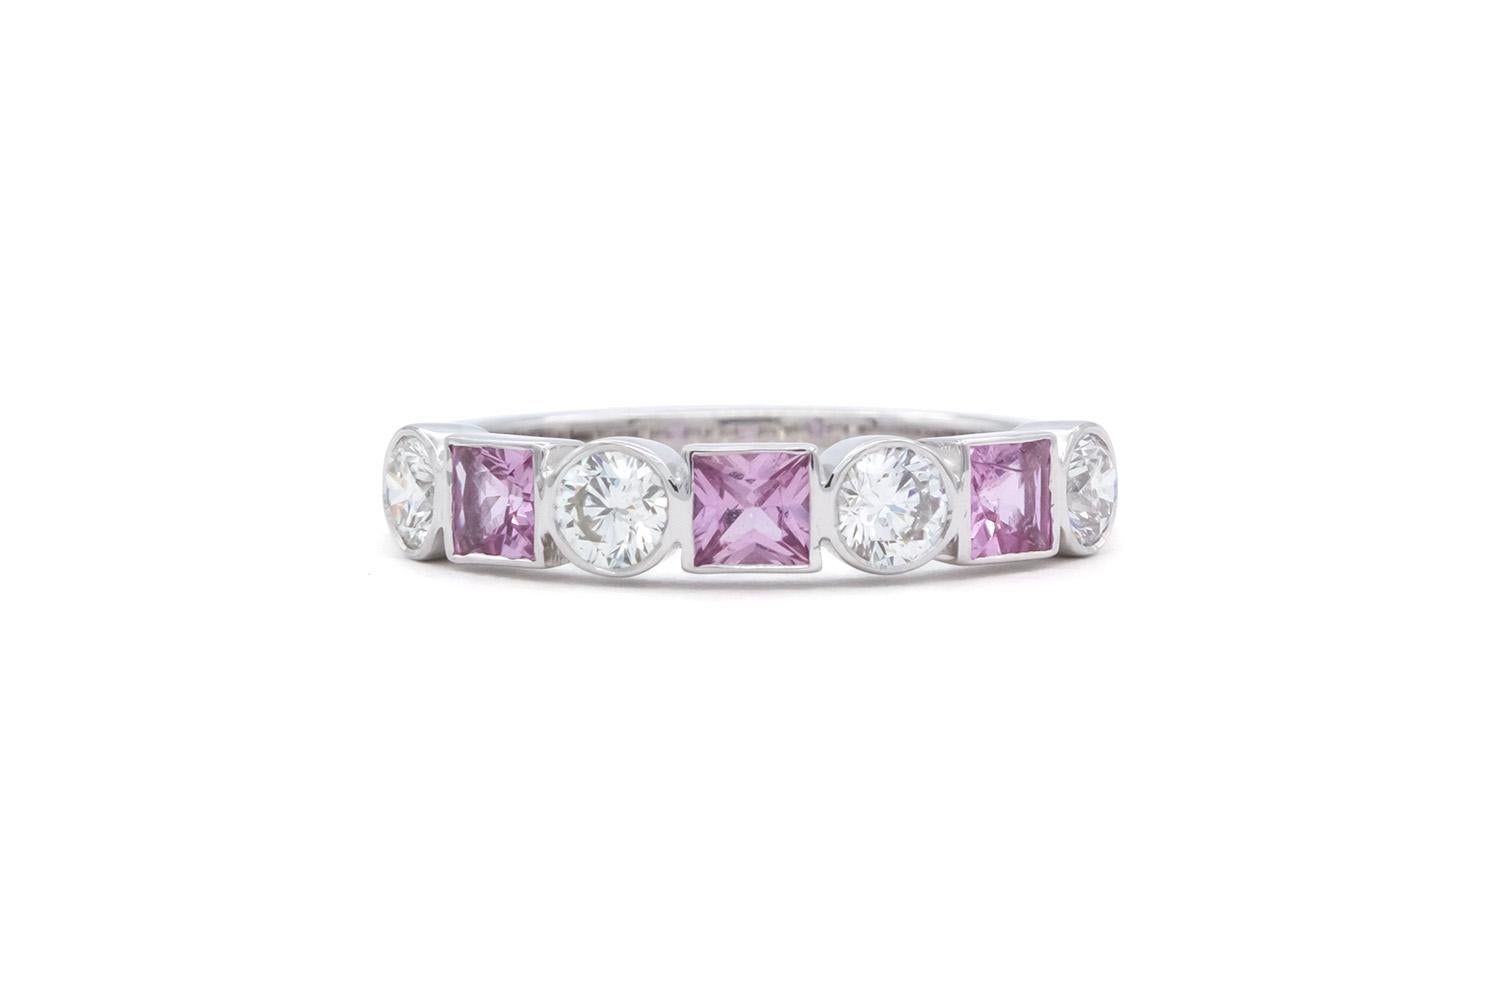 We are pleased to offer this 14k White Gold Pink Sapphire & Diamond Fashion Stacking Ring. This stunning ring feature 0.33ctw natural princess cut pink sapphires accented by 0.40ctw G-H/VS-SI round brilliant cut diamonds all bezel set in a 14k white